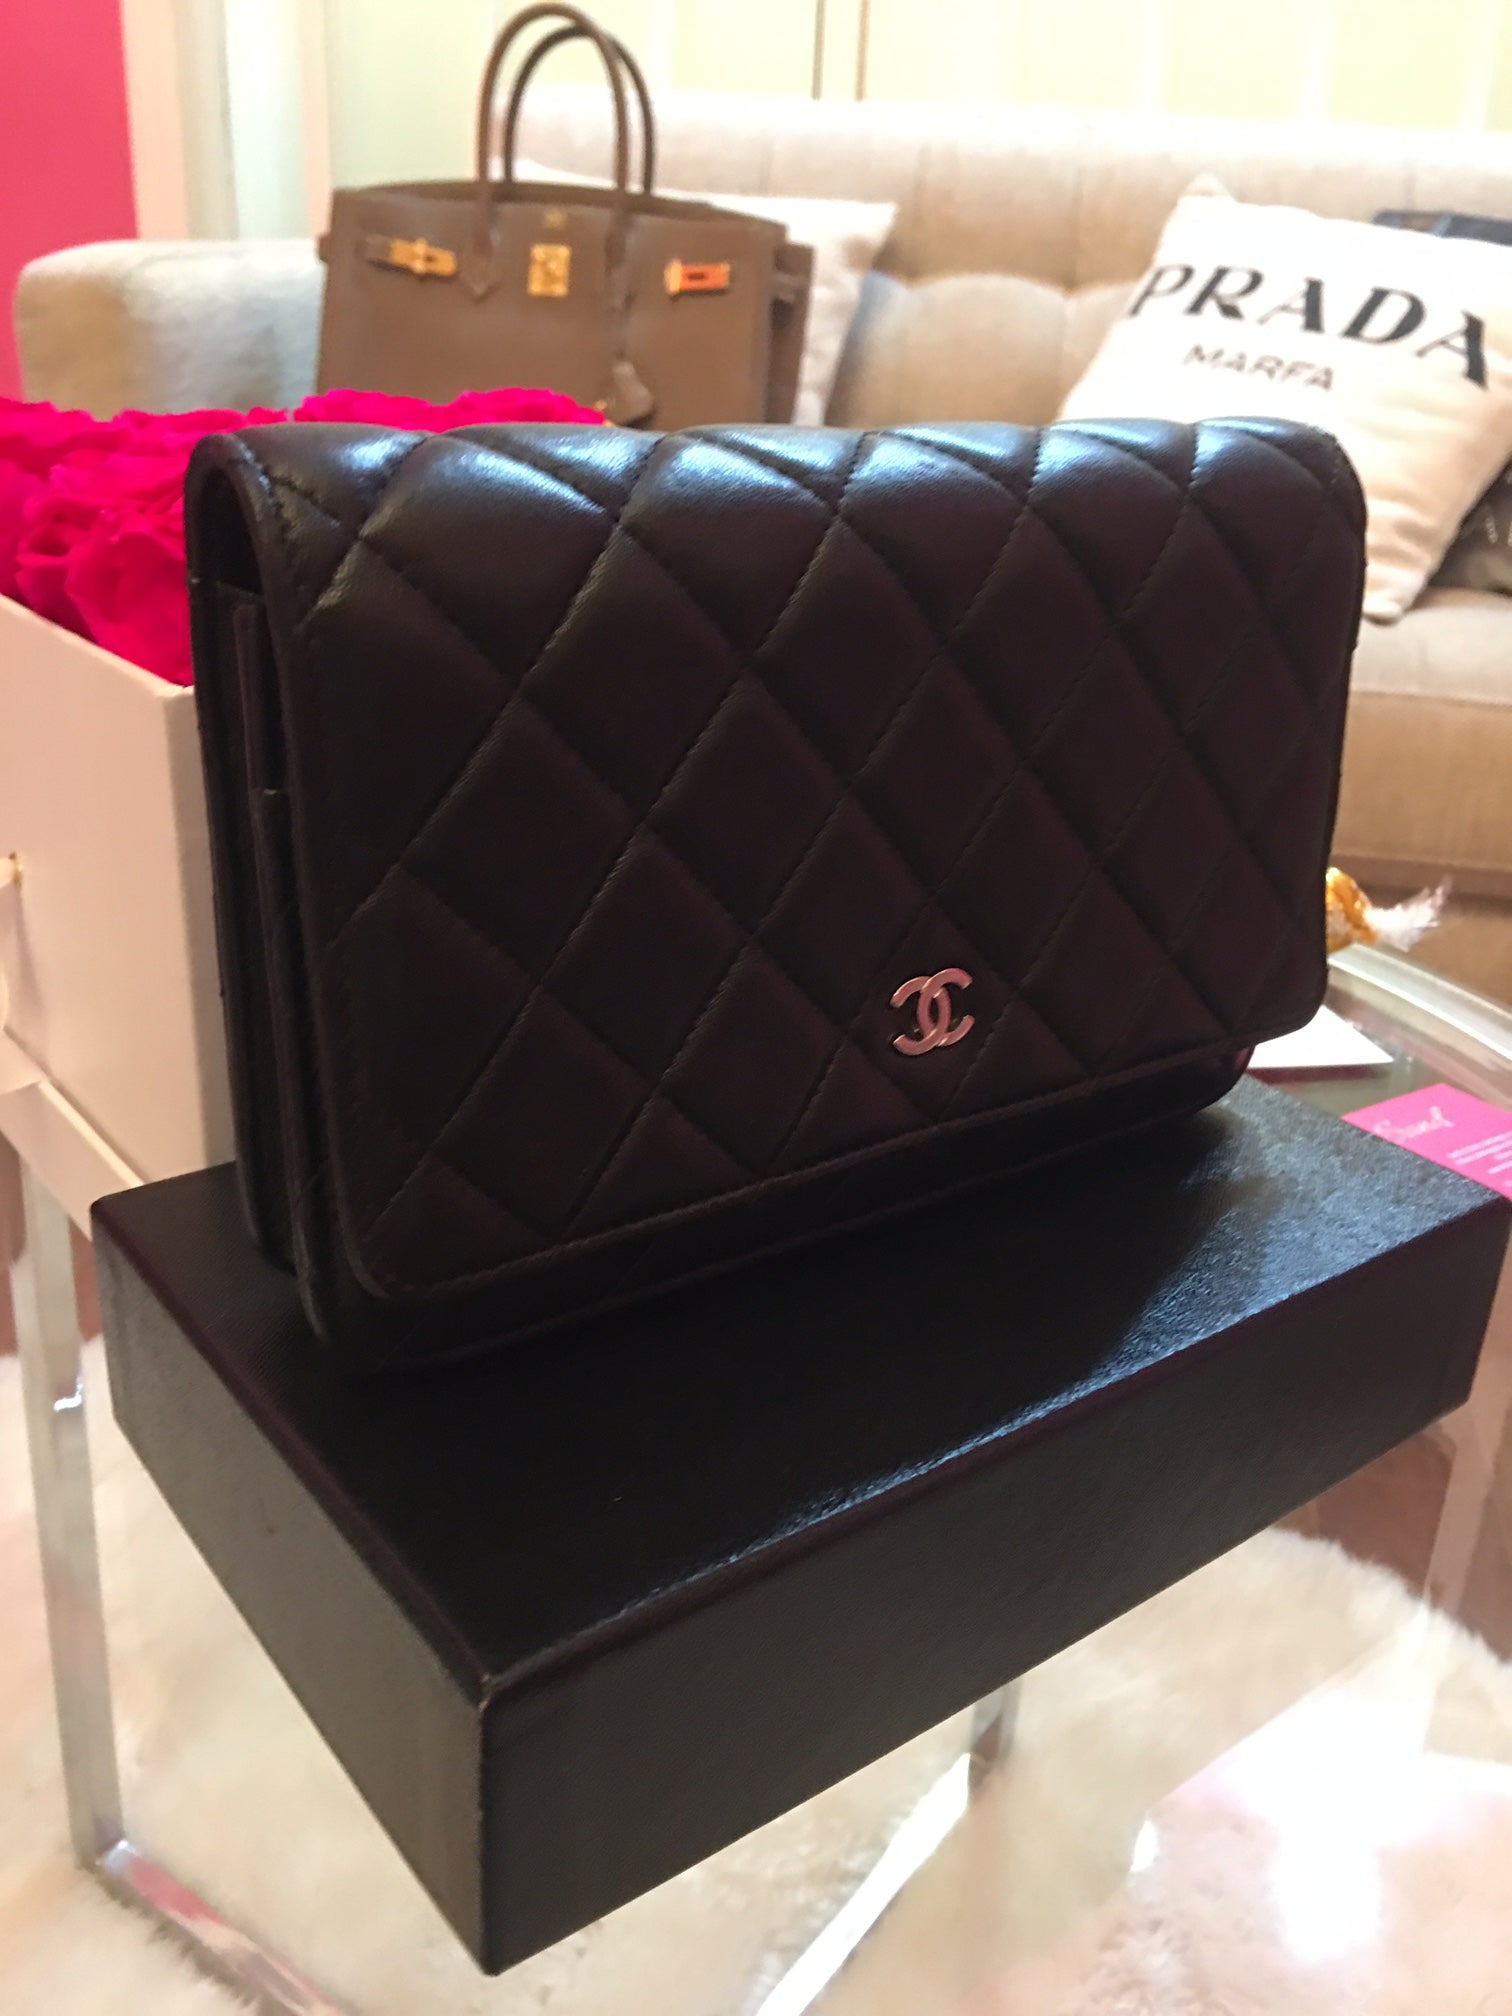 Chanel WOC – Beccas Bags